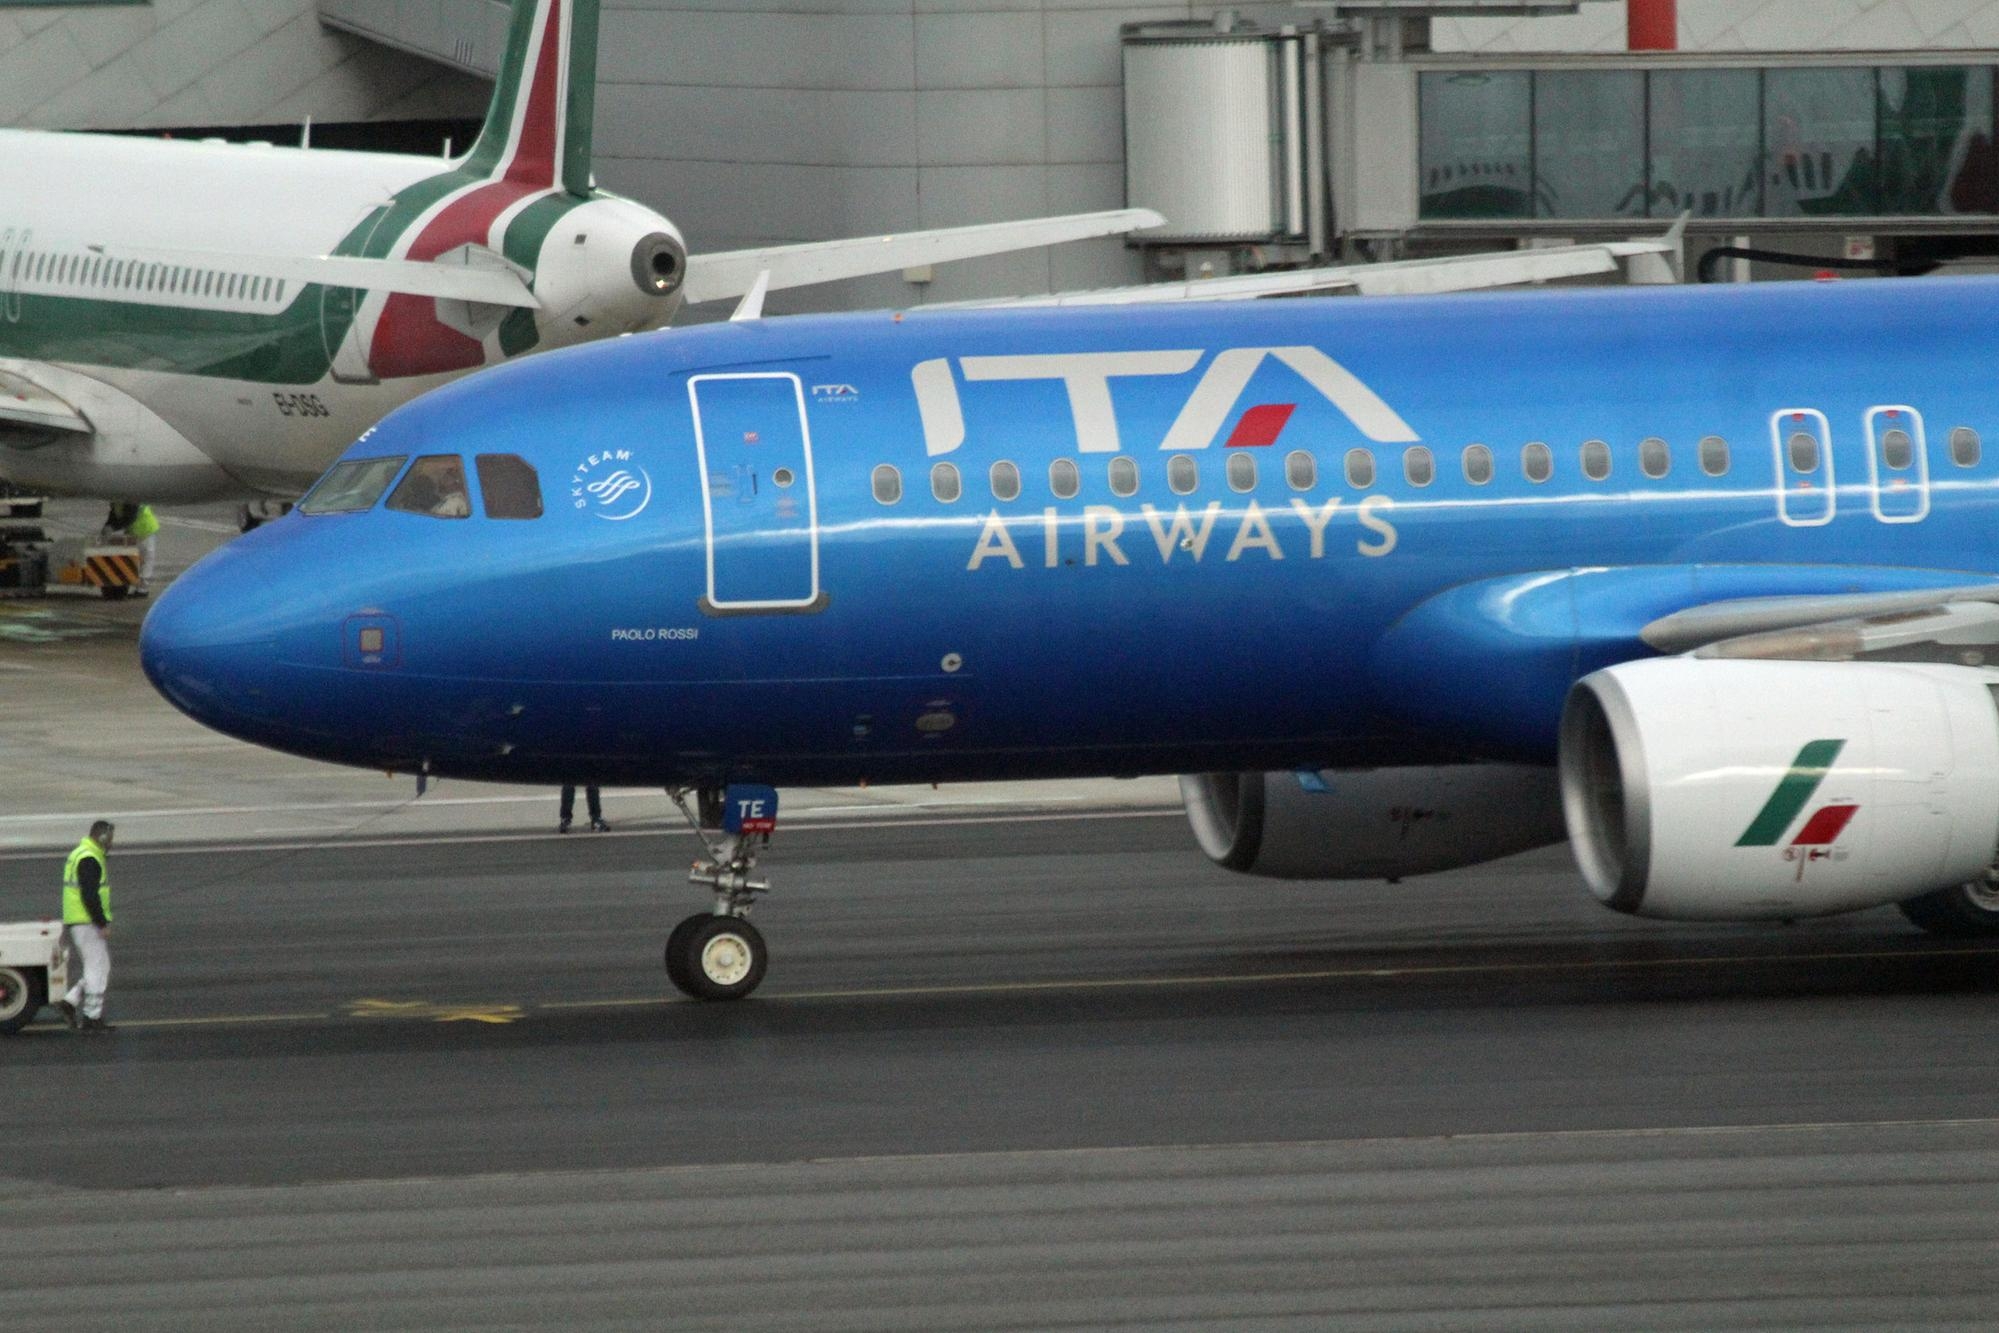 The first Ita Airways aircraft with the new blue livery towards the take-off phase from Rome Fiumicino airport to Milan, 24 December 2021.  ANSA/TELENEWS